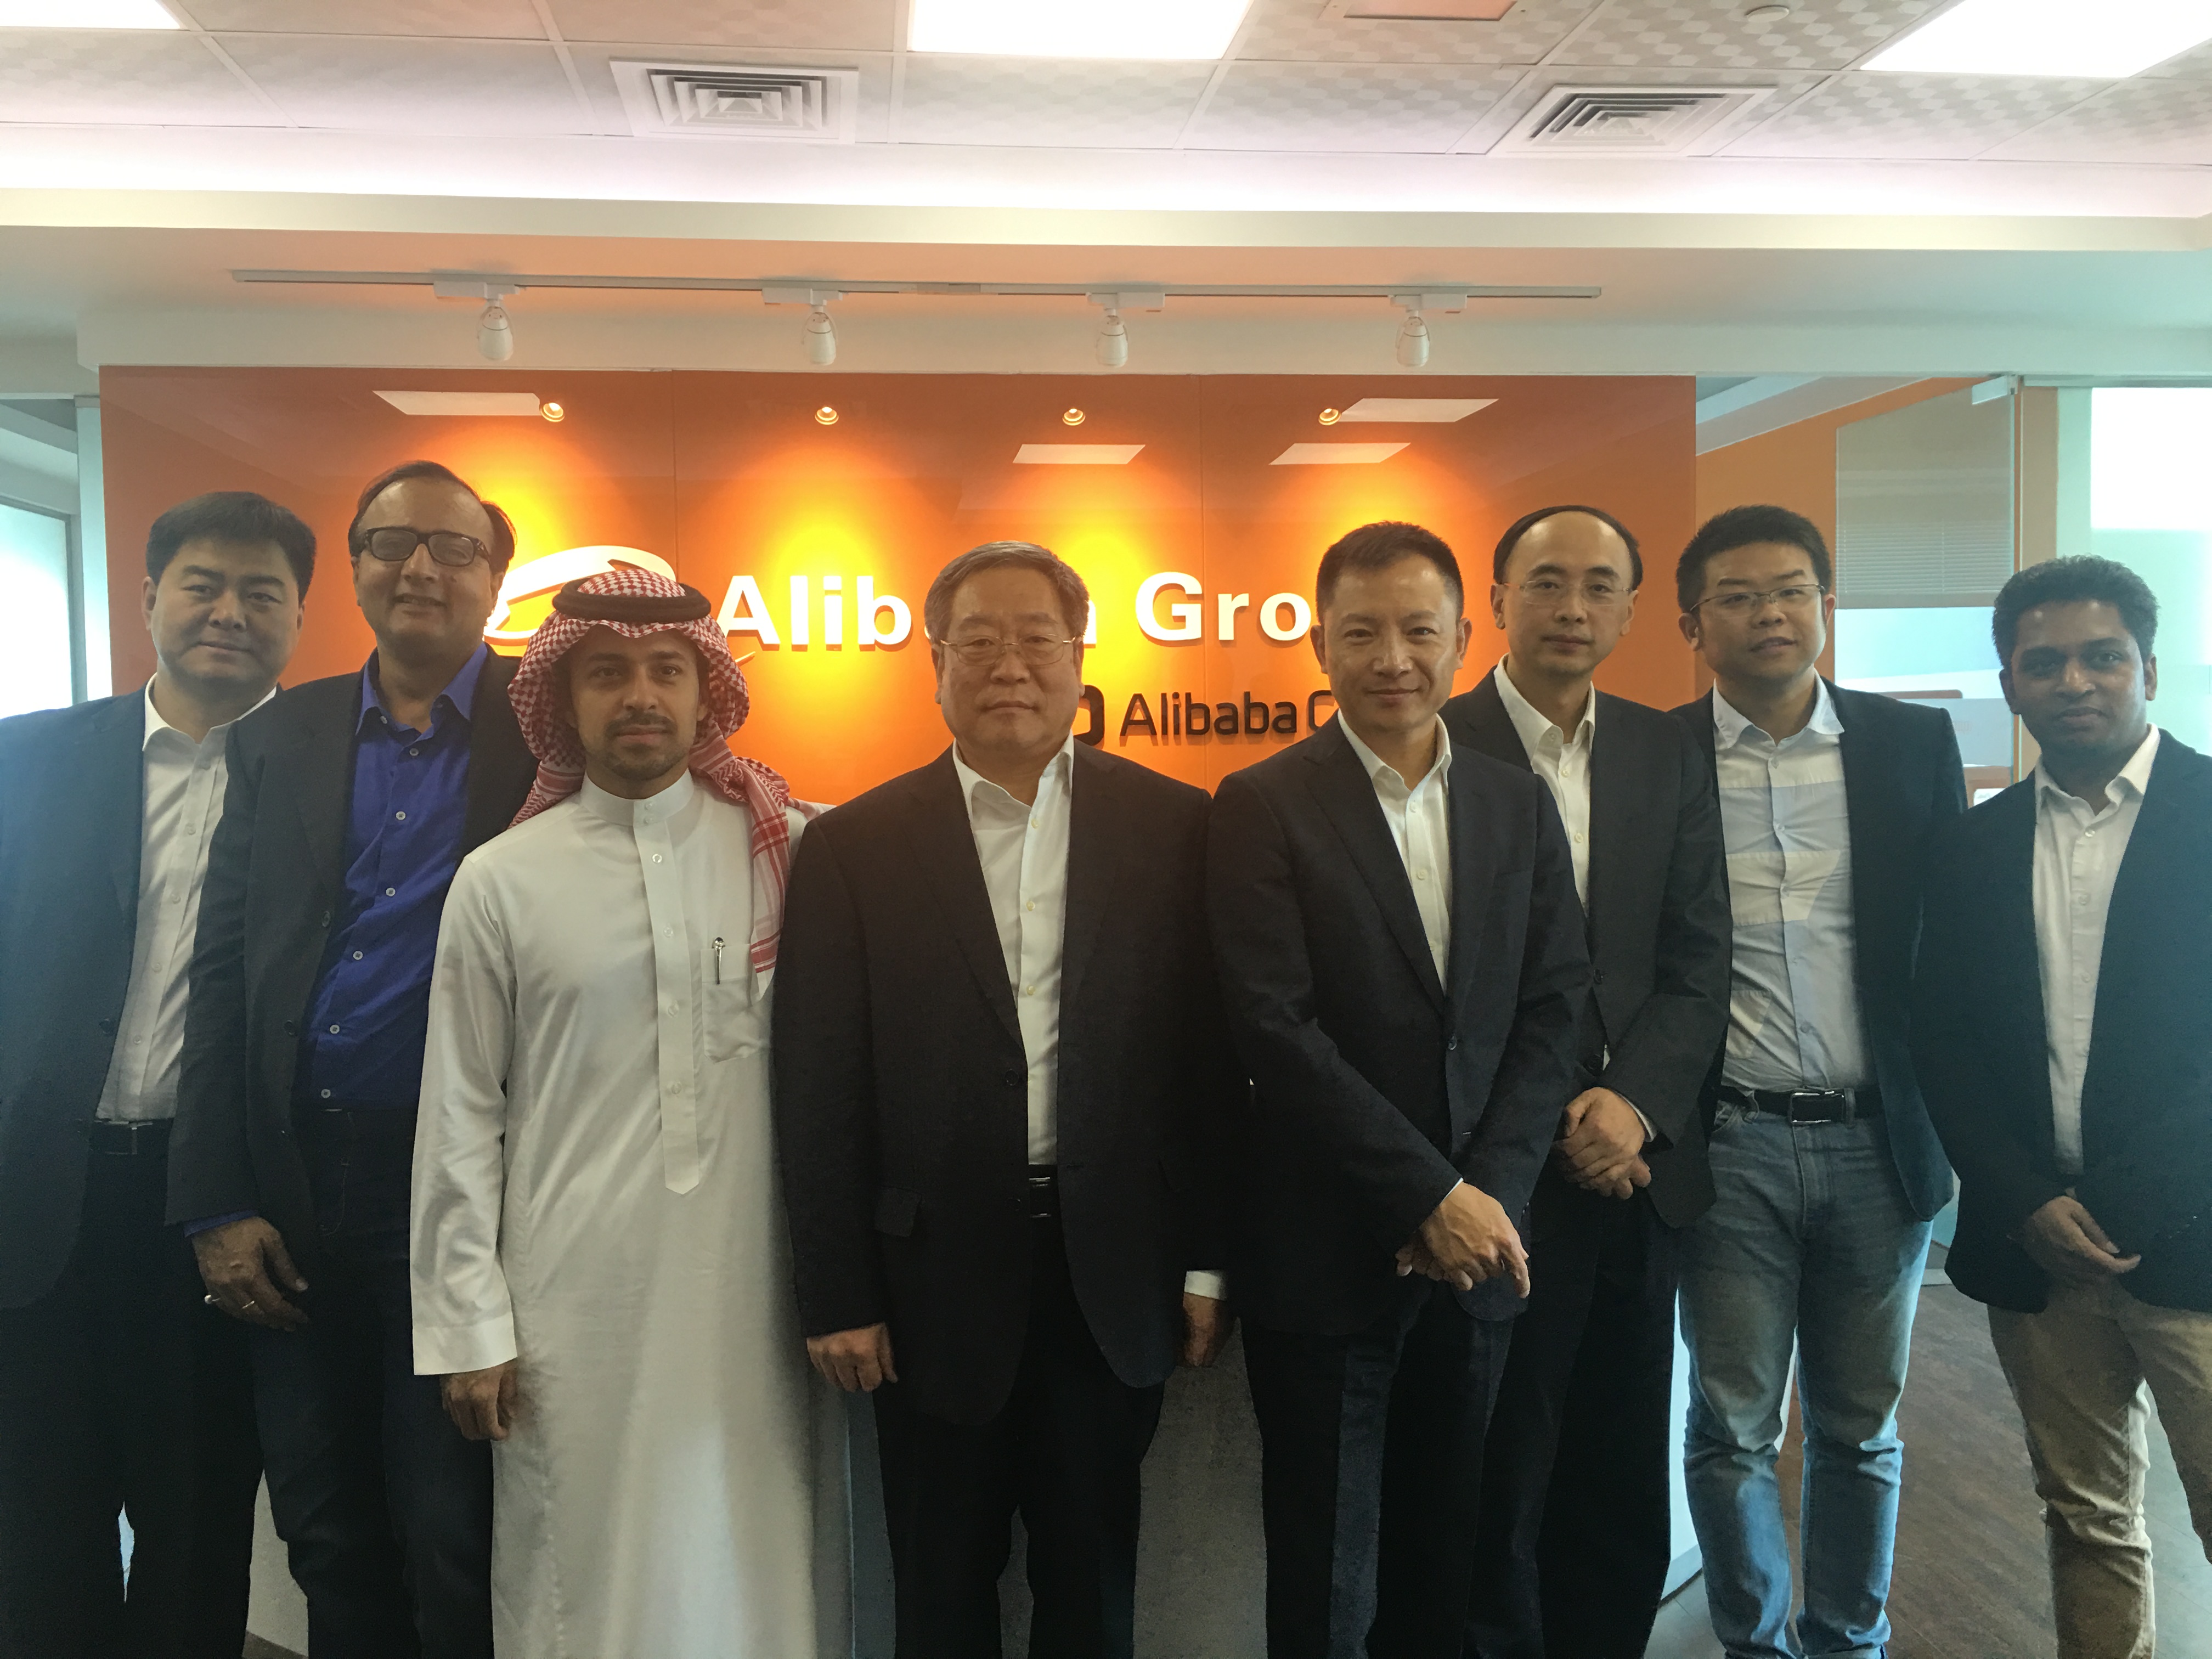 Alibaba Cloud and Yvolv commit to China’s “One Belt, One Road”